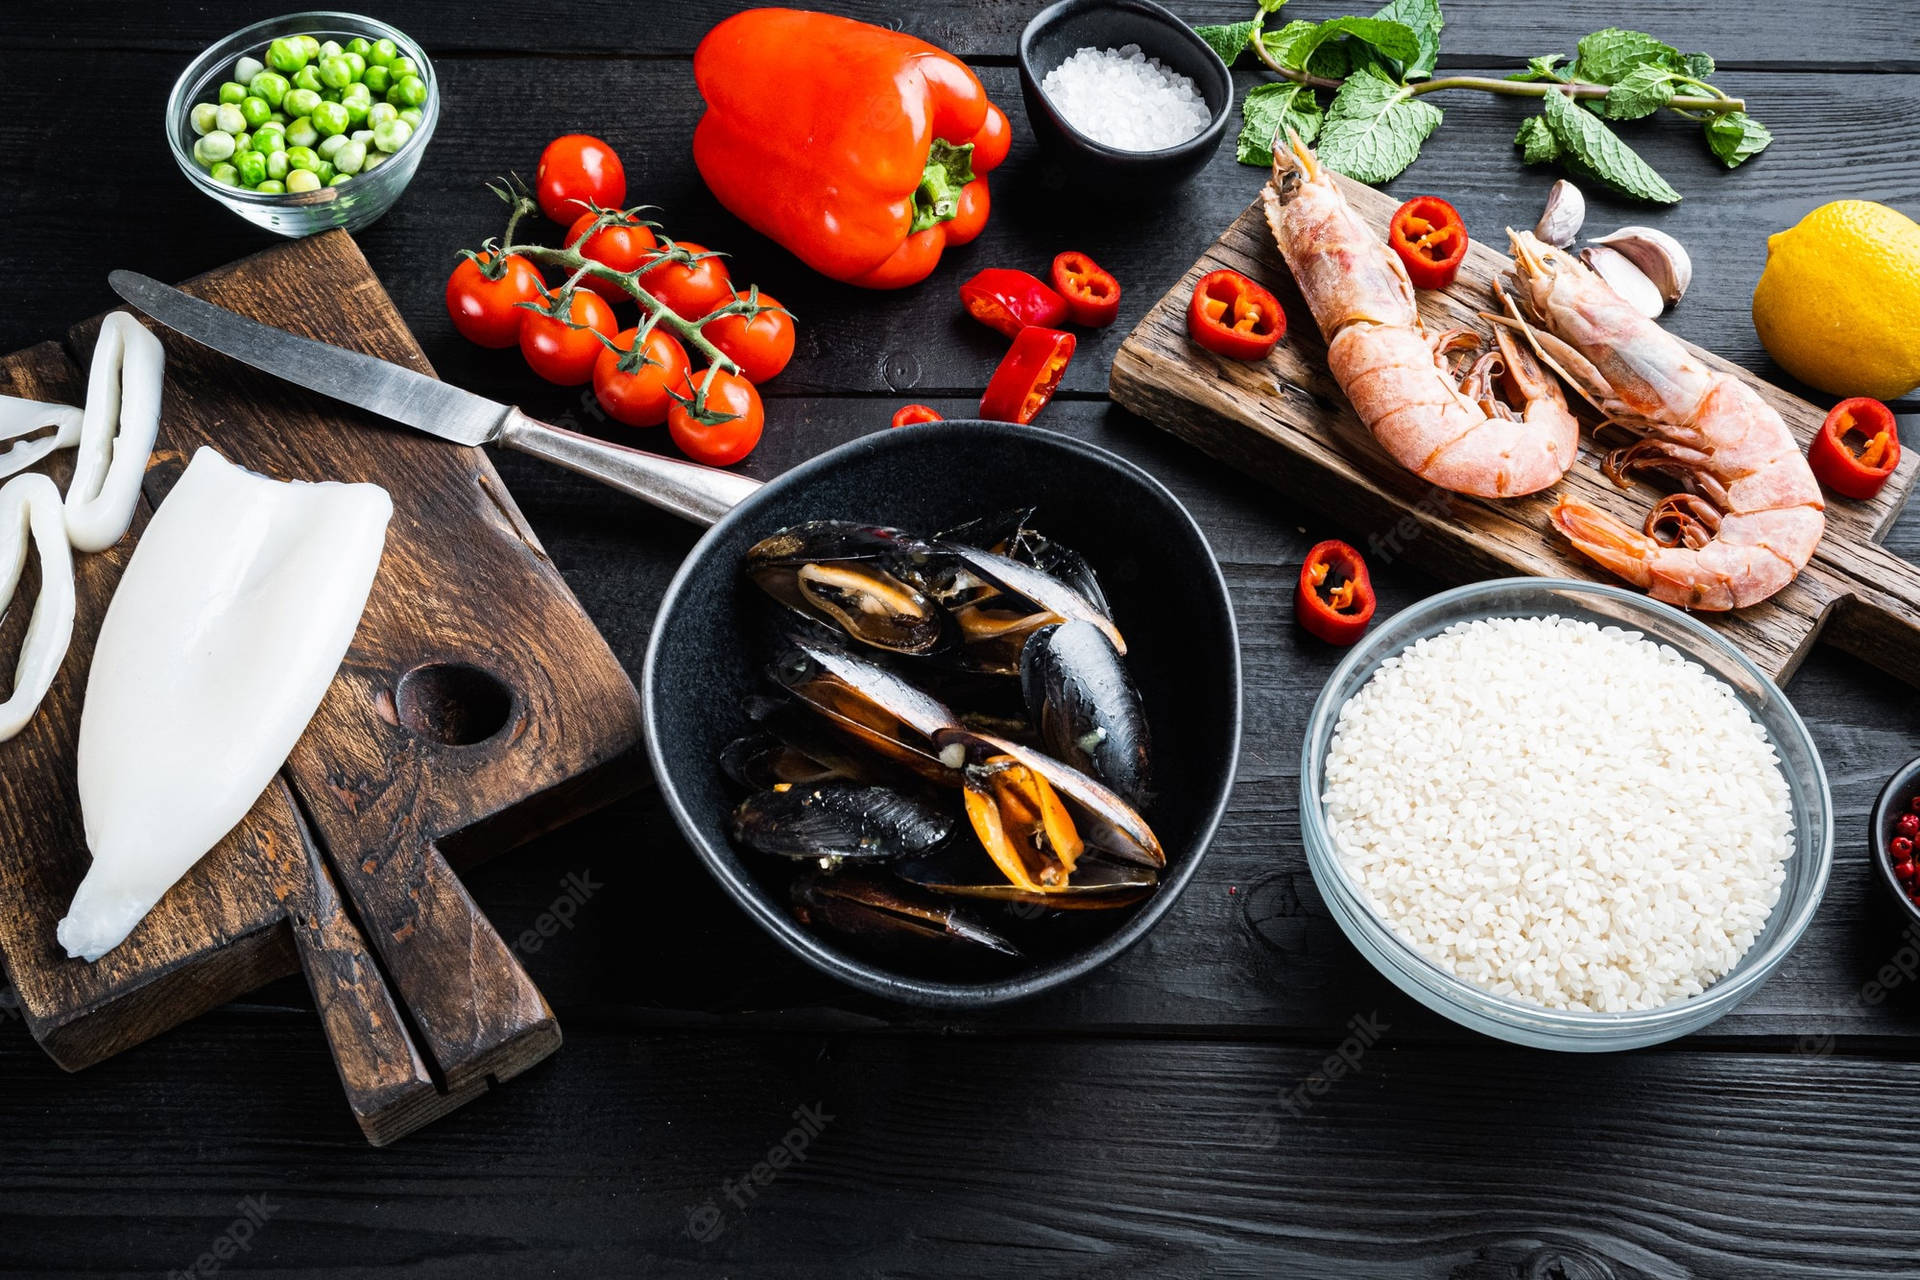 Paella Raw Ingredients From Scratch Cooking Wallpaper